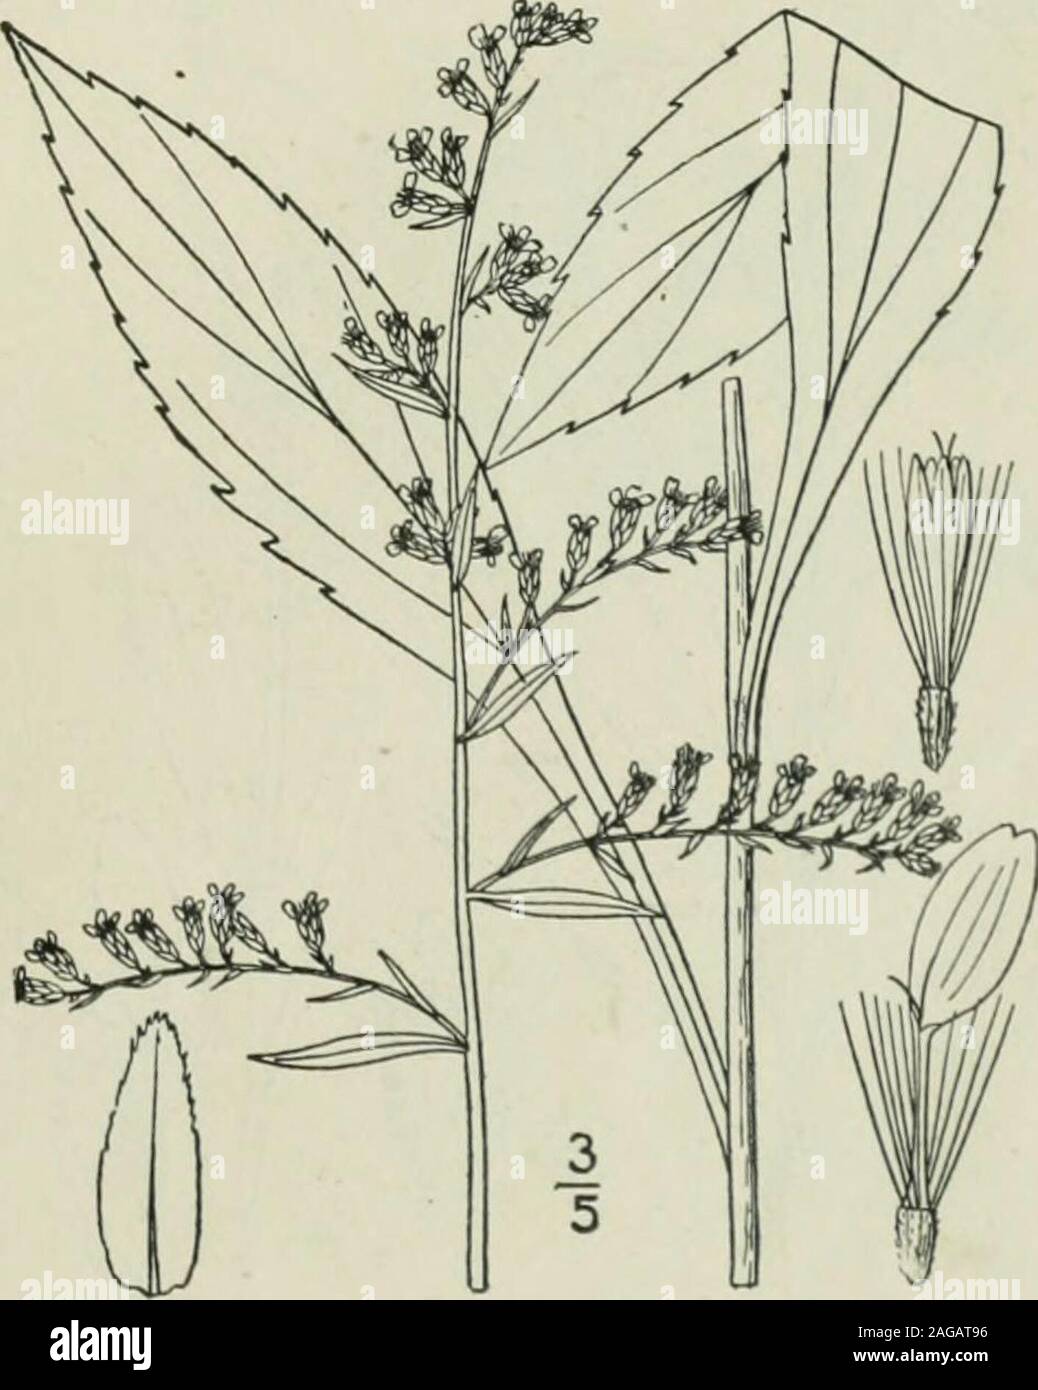 . An illustrated flora of the northern United States, Canada and the British possessions : from Newfoundland to the parallel of the southern boundary of Virginia and from the Atlantic Ocean westward to the 102nd meridian. he involucre linear-oblong, obtuse;achenes pubescent. In dry woods. Virginia to Florida and Texas.Recorded from Missouri. Ascends to 3000 ft. inVirginia. July-Sept. 29. Solidago ulmifolia Muhl. Elm-leaved Golden-rod. Fig. 4241. Solidago ulmifolia Muhl.; Willd. Sp. PI. 3: 2060. 1804. Stem slender, glabrous, or puberulent atthe summit, 2°-4° high, simple, or branchedabove, the Stock Photo